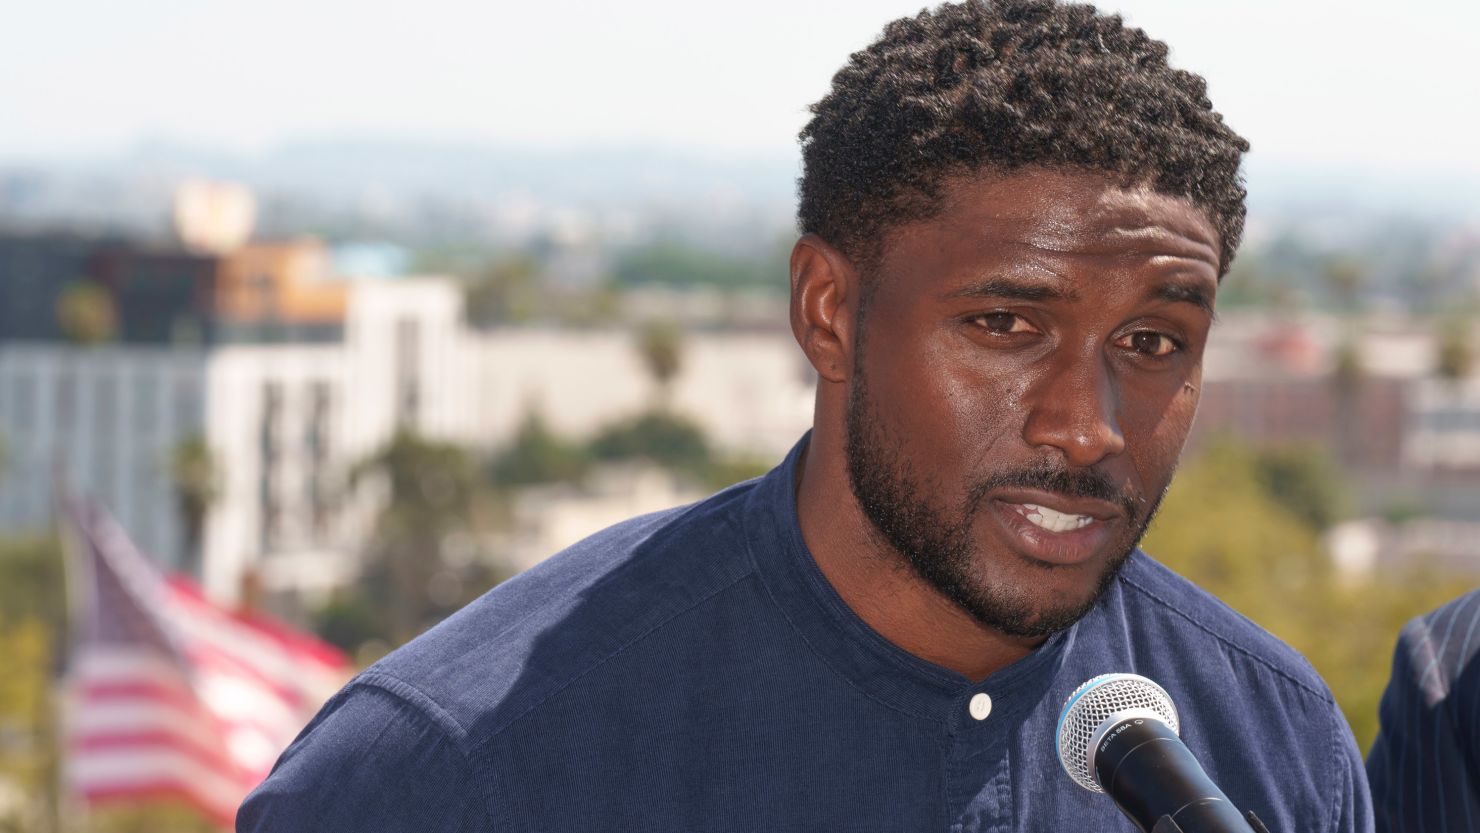 Former USC football player Reggie Bush speaks at a news conference announcing a defamation lawsuit against the NCAA at the Los Angeles Memorial Coliseum.